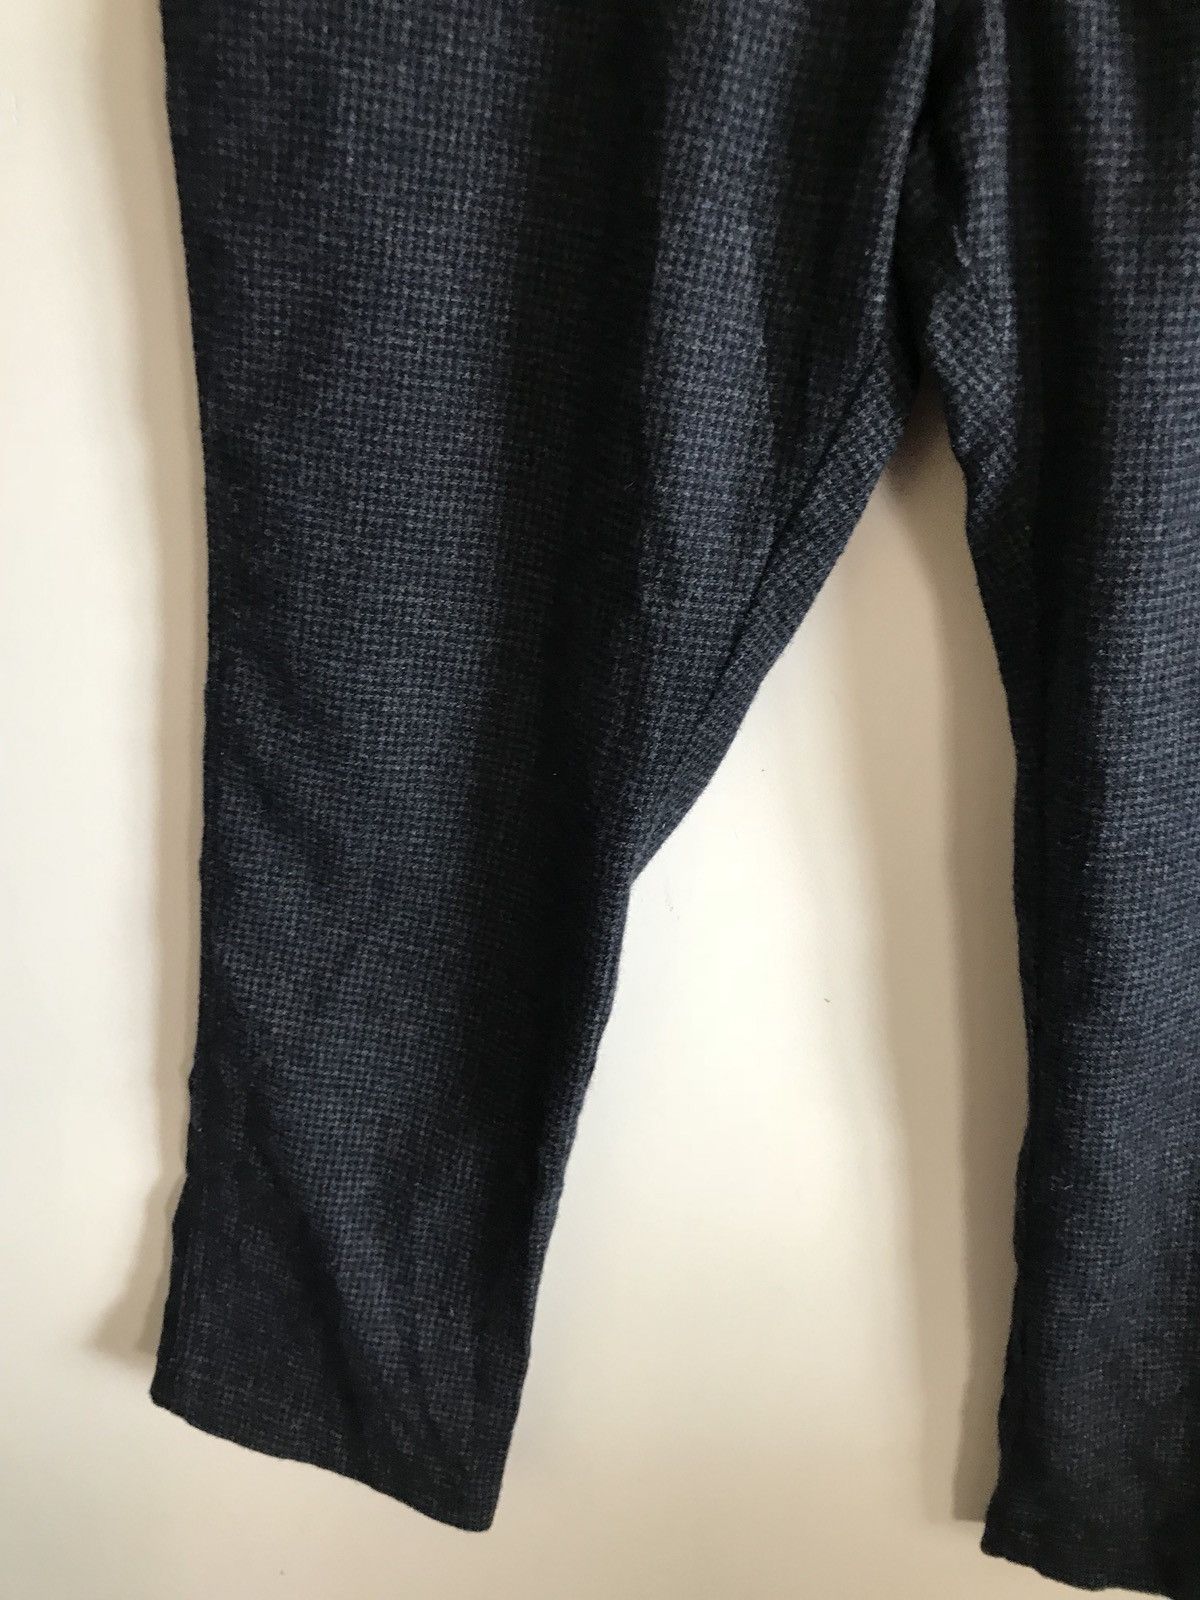 Urban Research Doors Made In Japan Urban Research Black Houndstooth Casual Pants Size US 34 / EU 50 - 4 Thumbnail